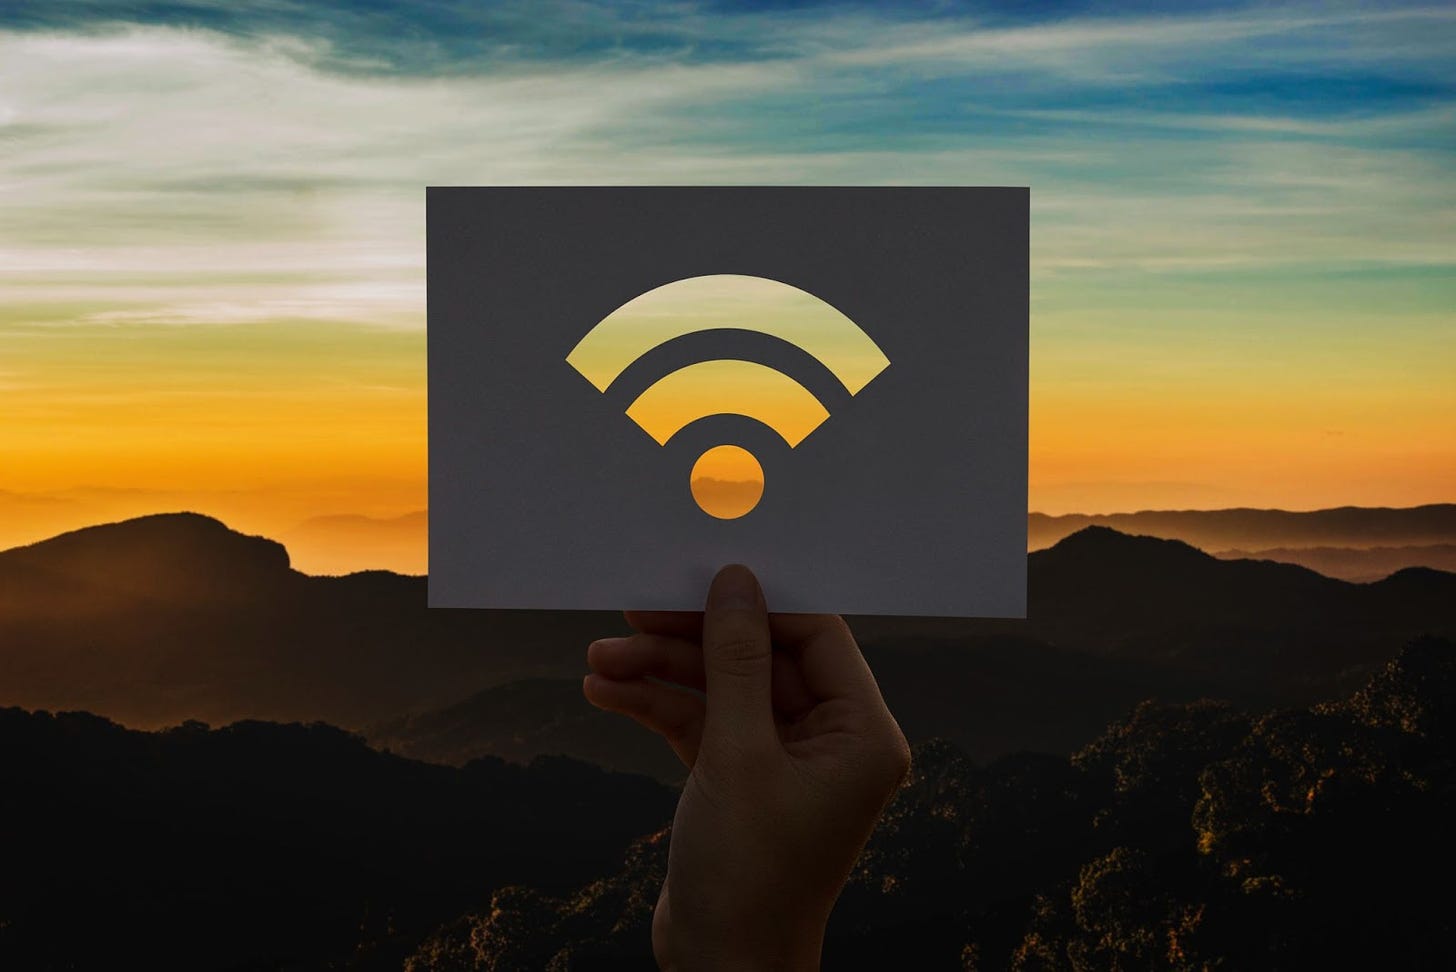 <a href="https://www.freepik.com/free-photo/wifi-internet-connection-perforated-paper_2989640.htm#query=WiFi%20Wars&position=14&from_view=search&track=ais&uuid=23c16933-0b58-4828-80a4-49a64714f363">Image by rawpixel.com</a> on Freepik